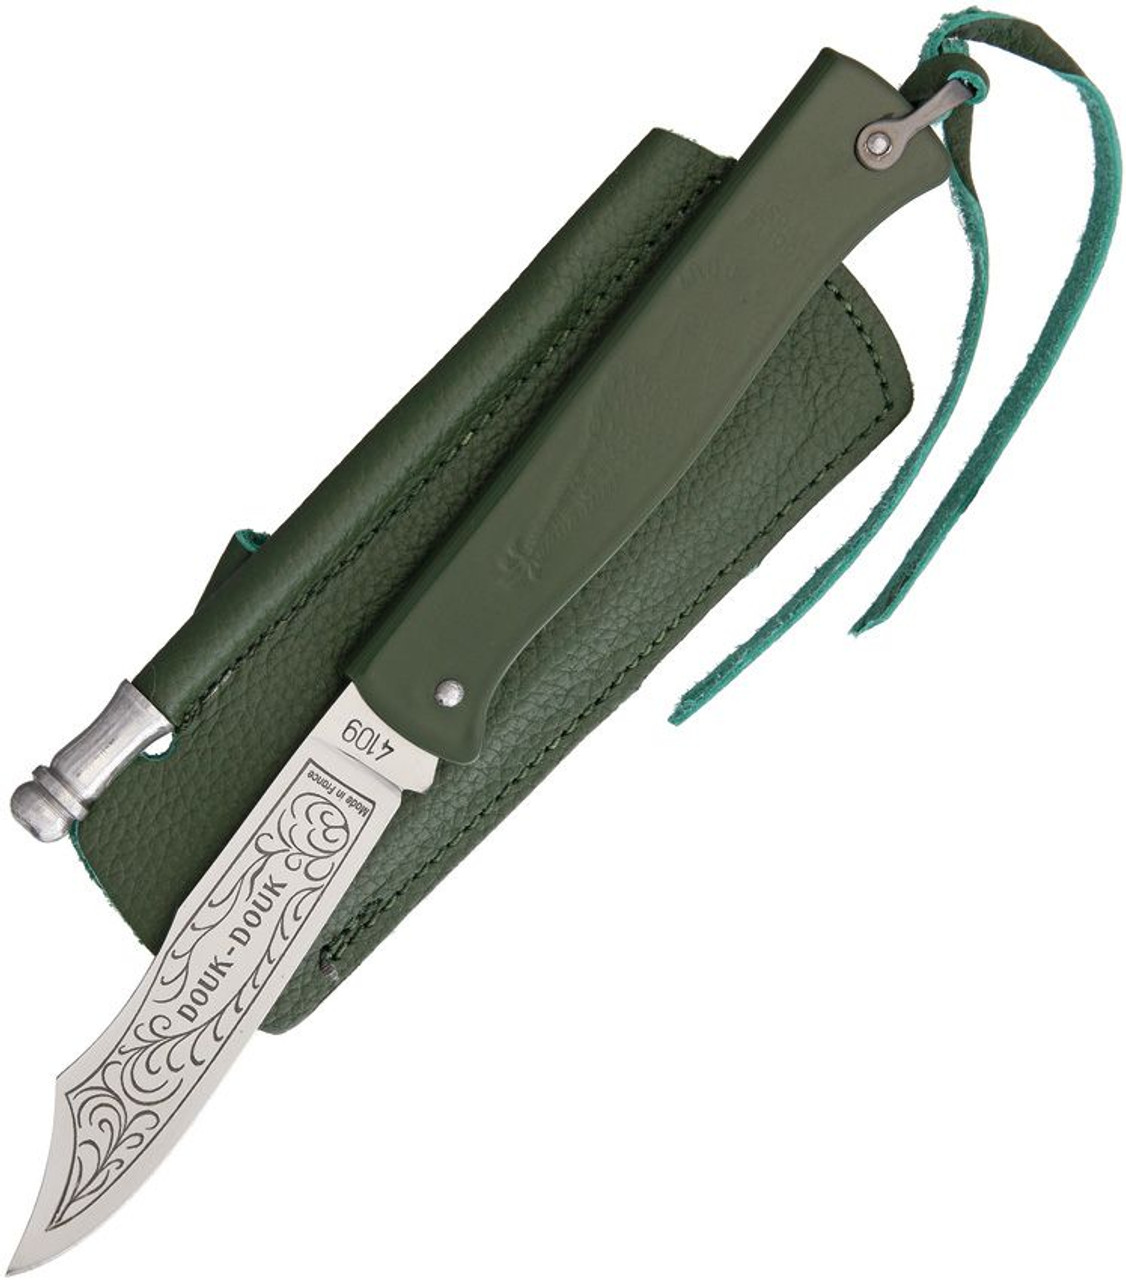 Douk-Douk Slip Joint Folder (DD815GMCOLG) 3.13" Hight Carbon Steel Satin Clip Point Blade, Green Stainless Steel Handle, Green Leather Pouch with Sharpening Rod